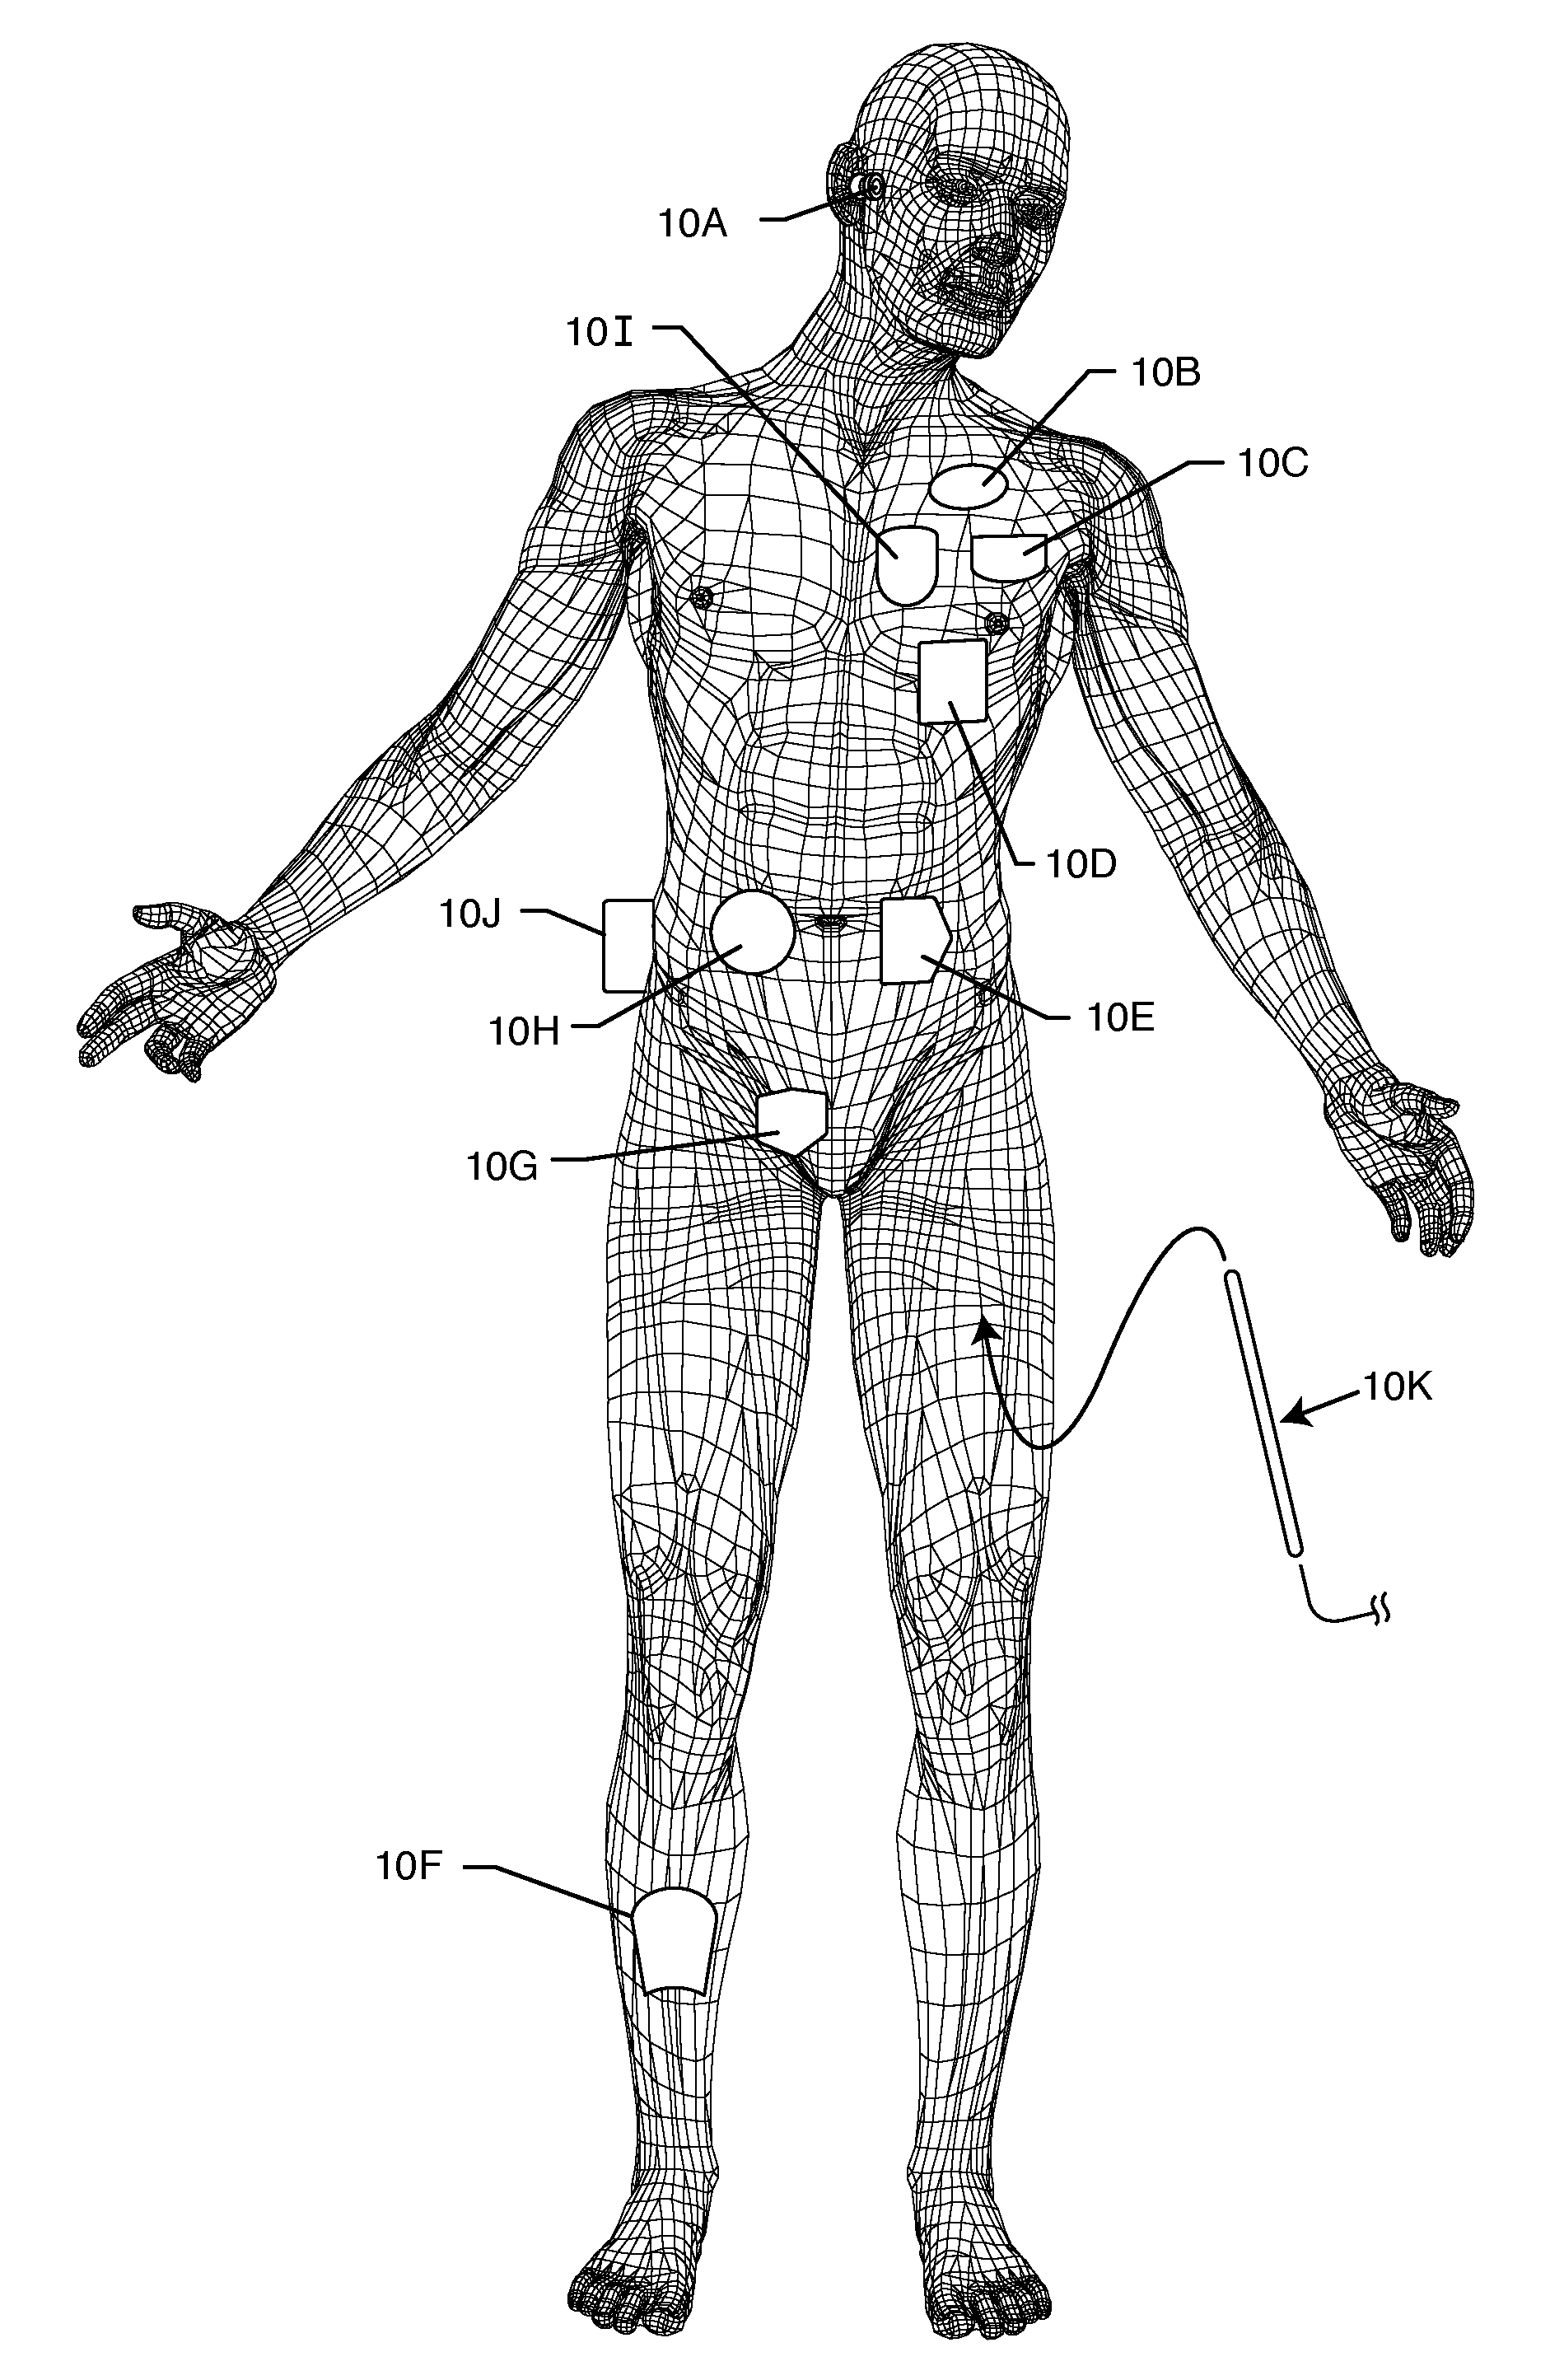 Process for transferring product information utilizing barcode reader into permanent memory for an implanted medical device